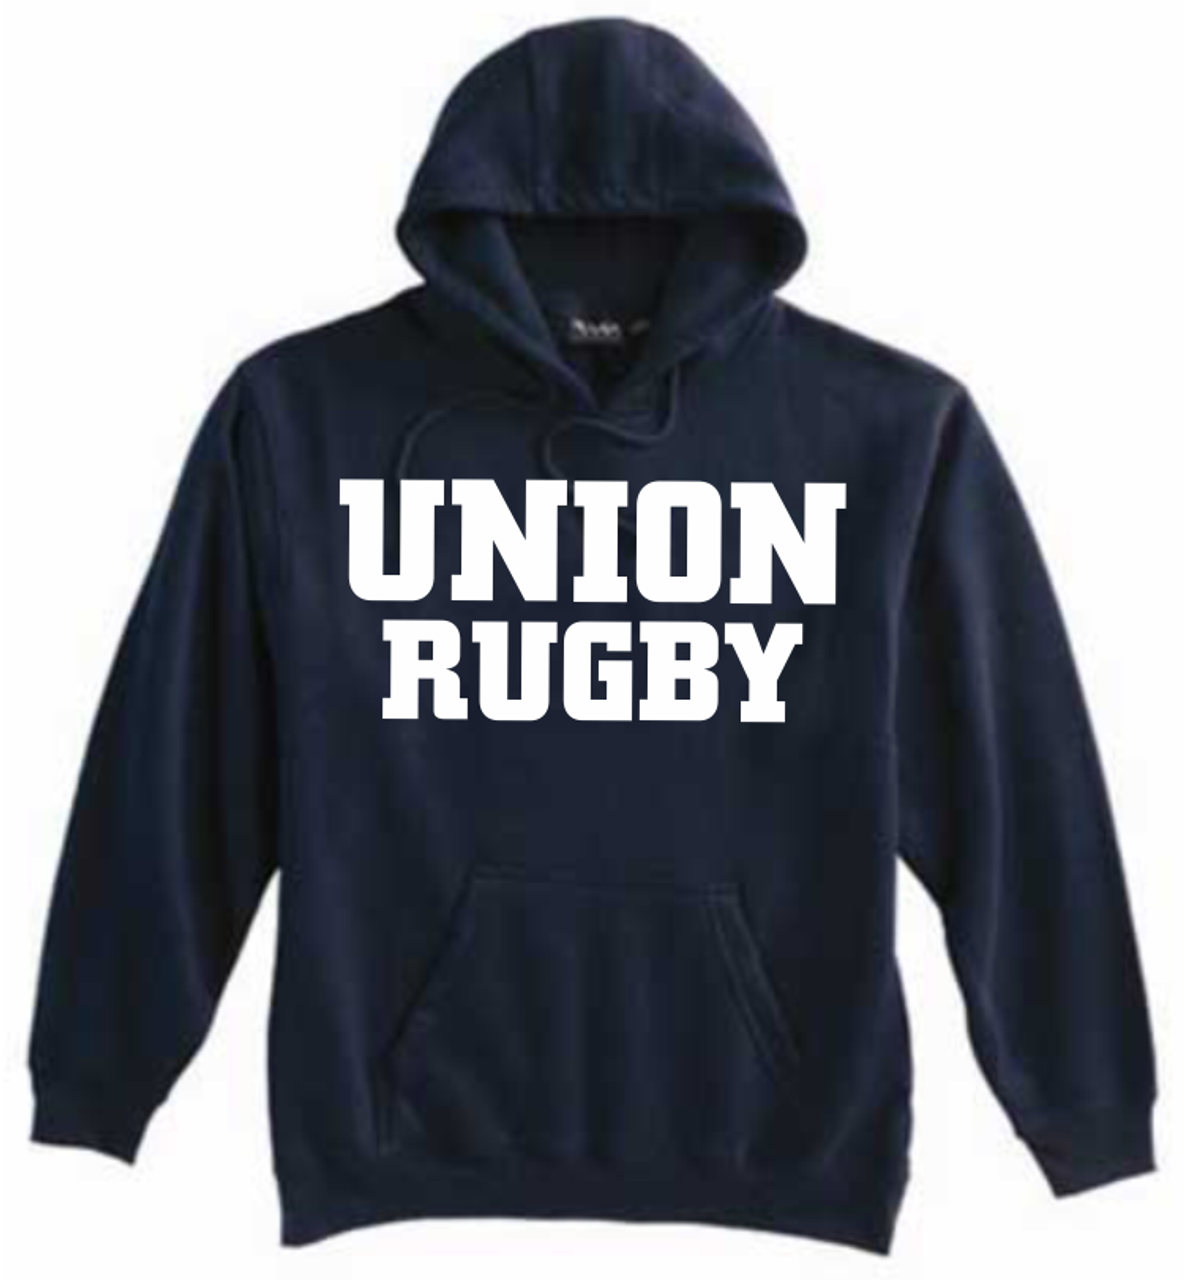 Union Rugby Hoodie, Navy